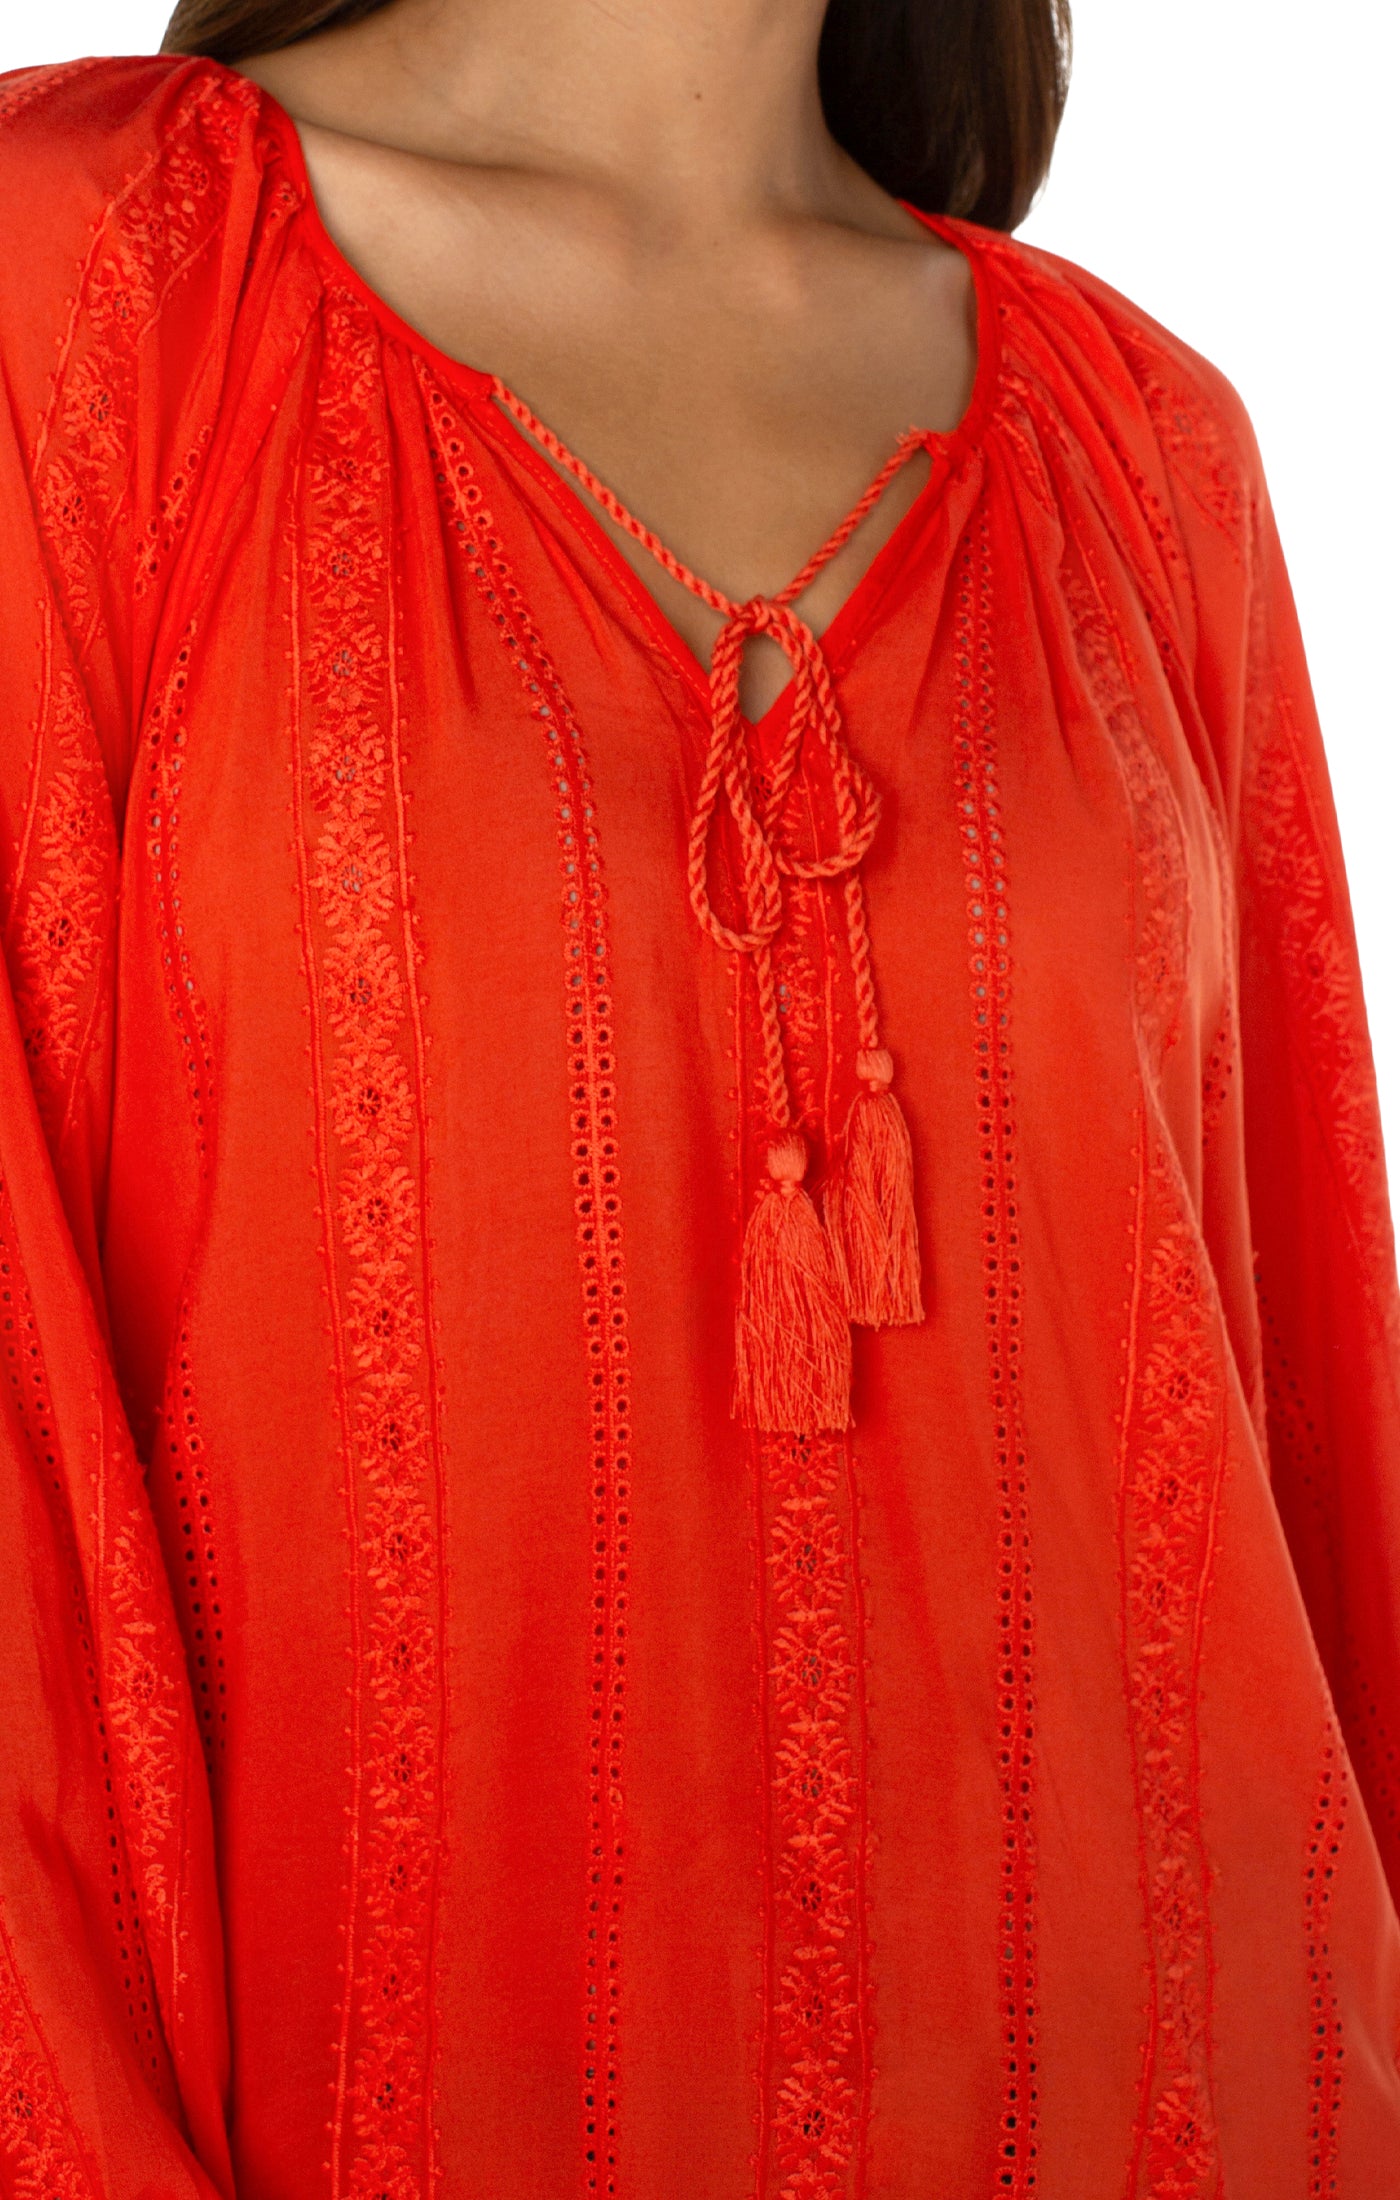 Sunset Glow Lace-Trimmed Peasant Top with Tassel Ties